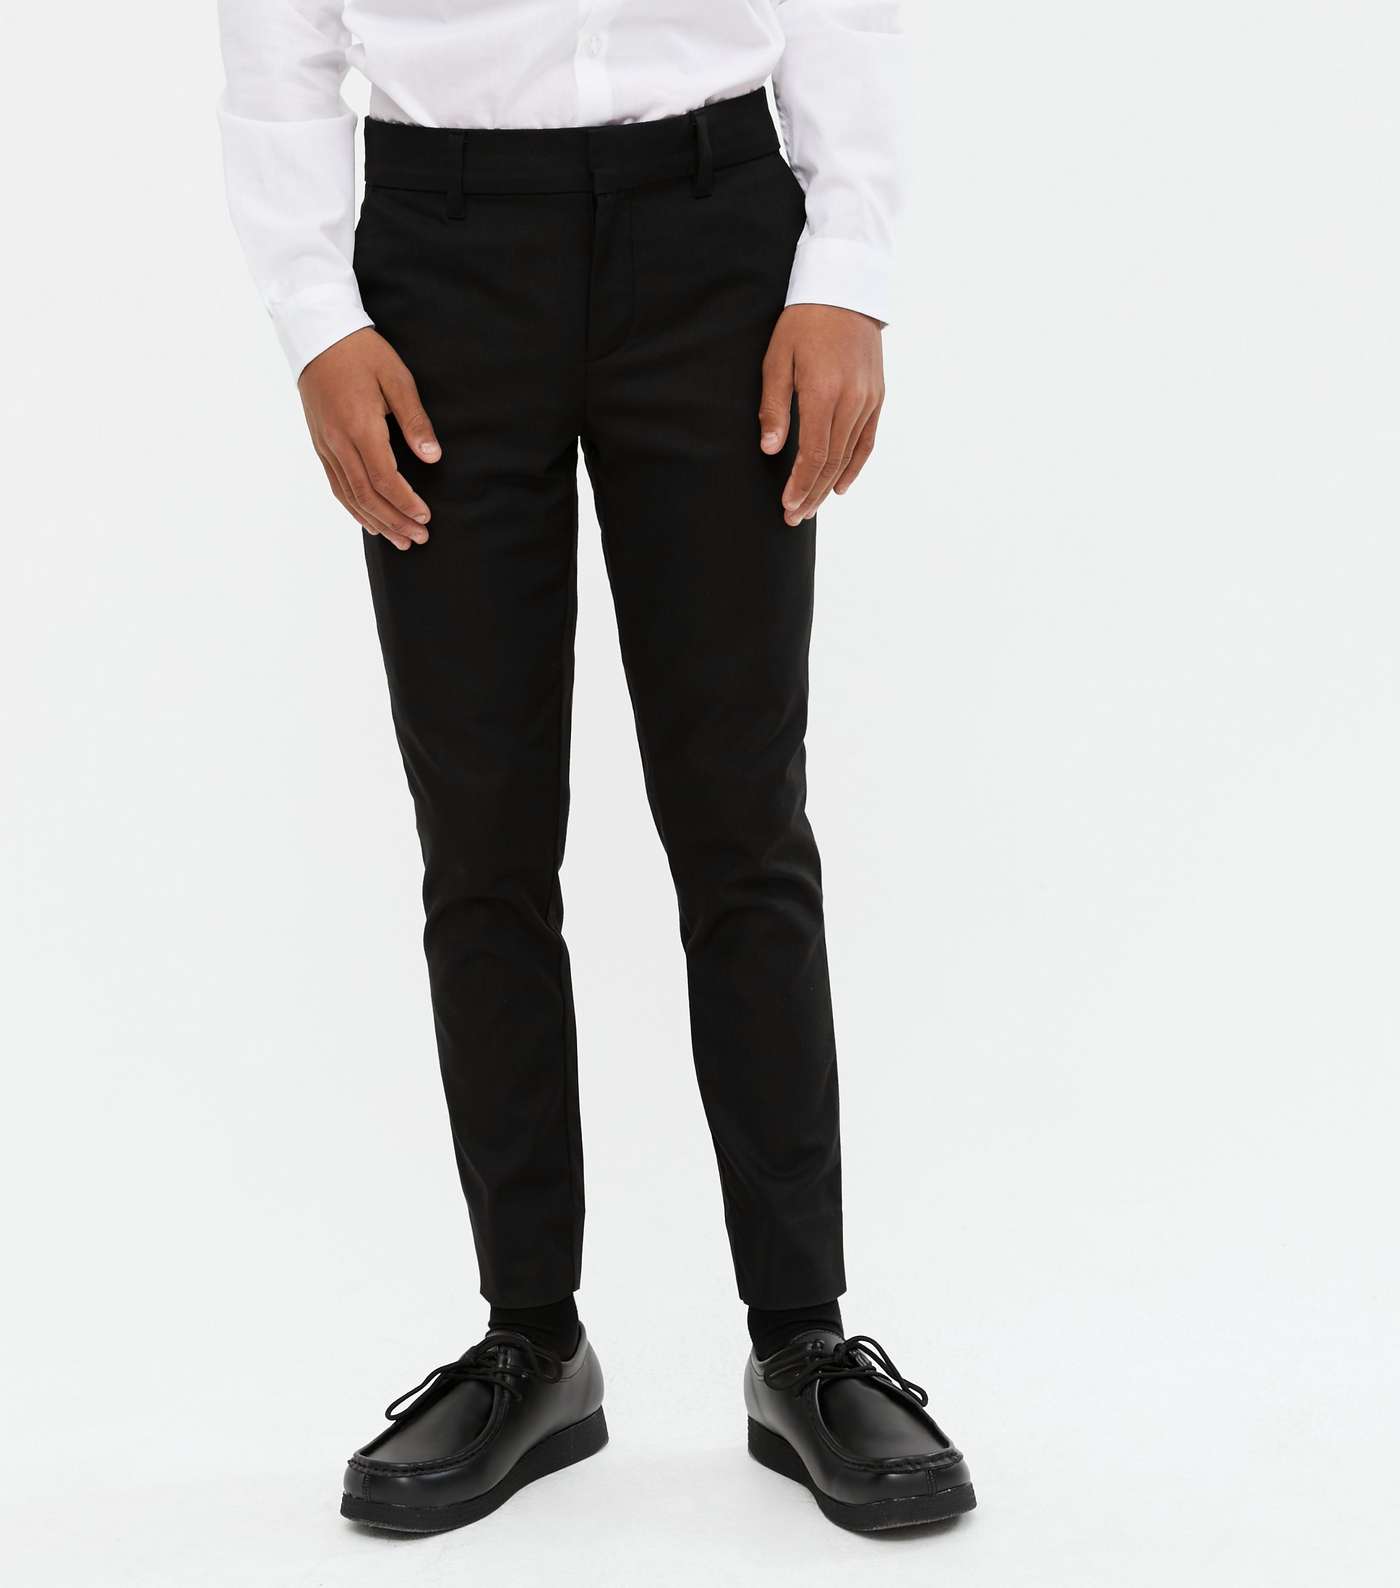 Boys Black Skinny Fit Trousers Image 2